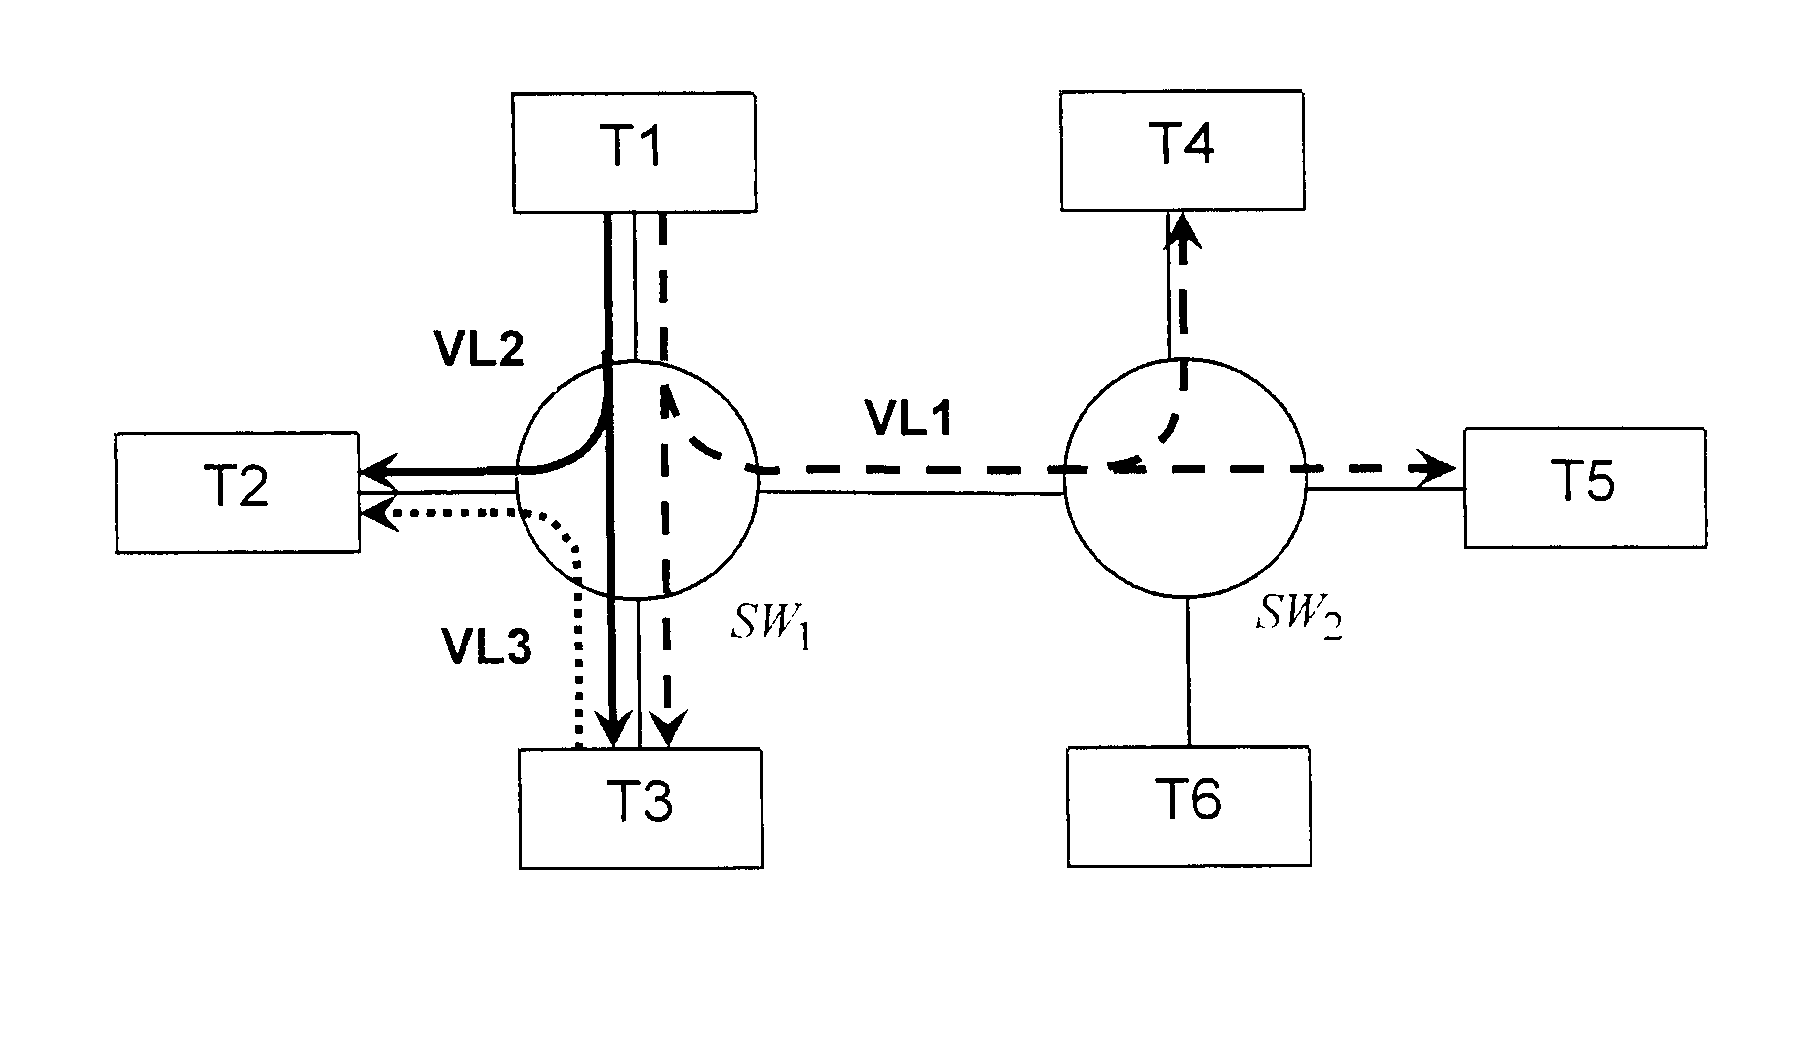 Method of routing virtual links in a frame-switching network with guaranteed determinism